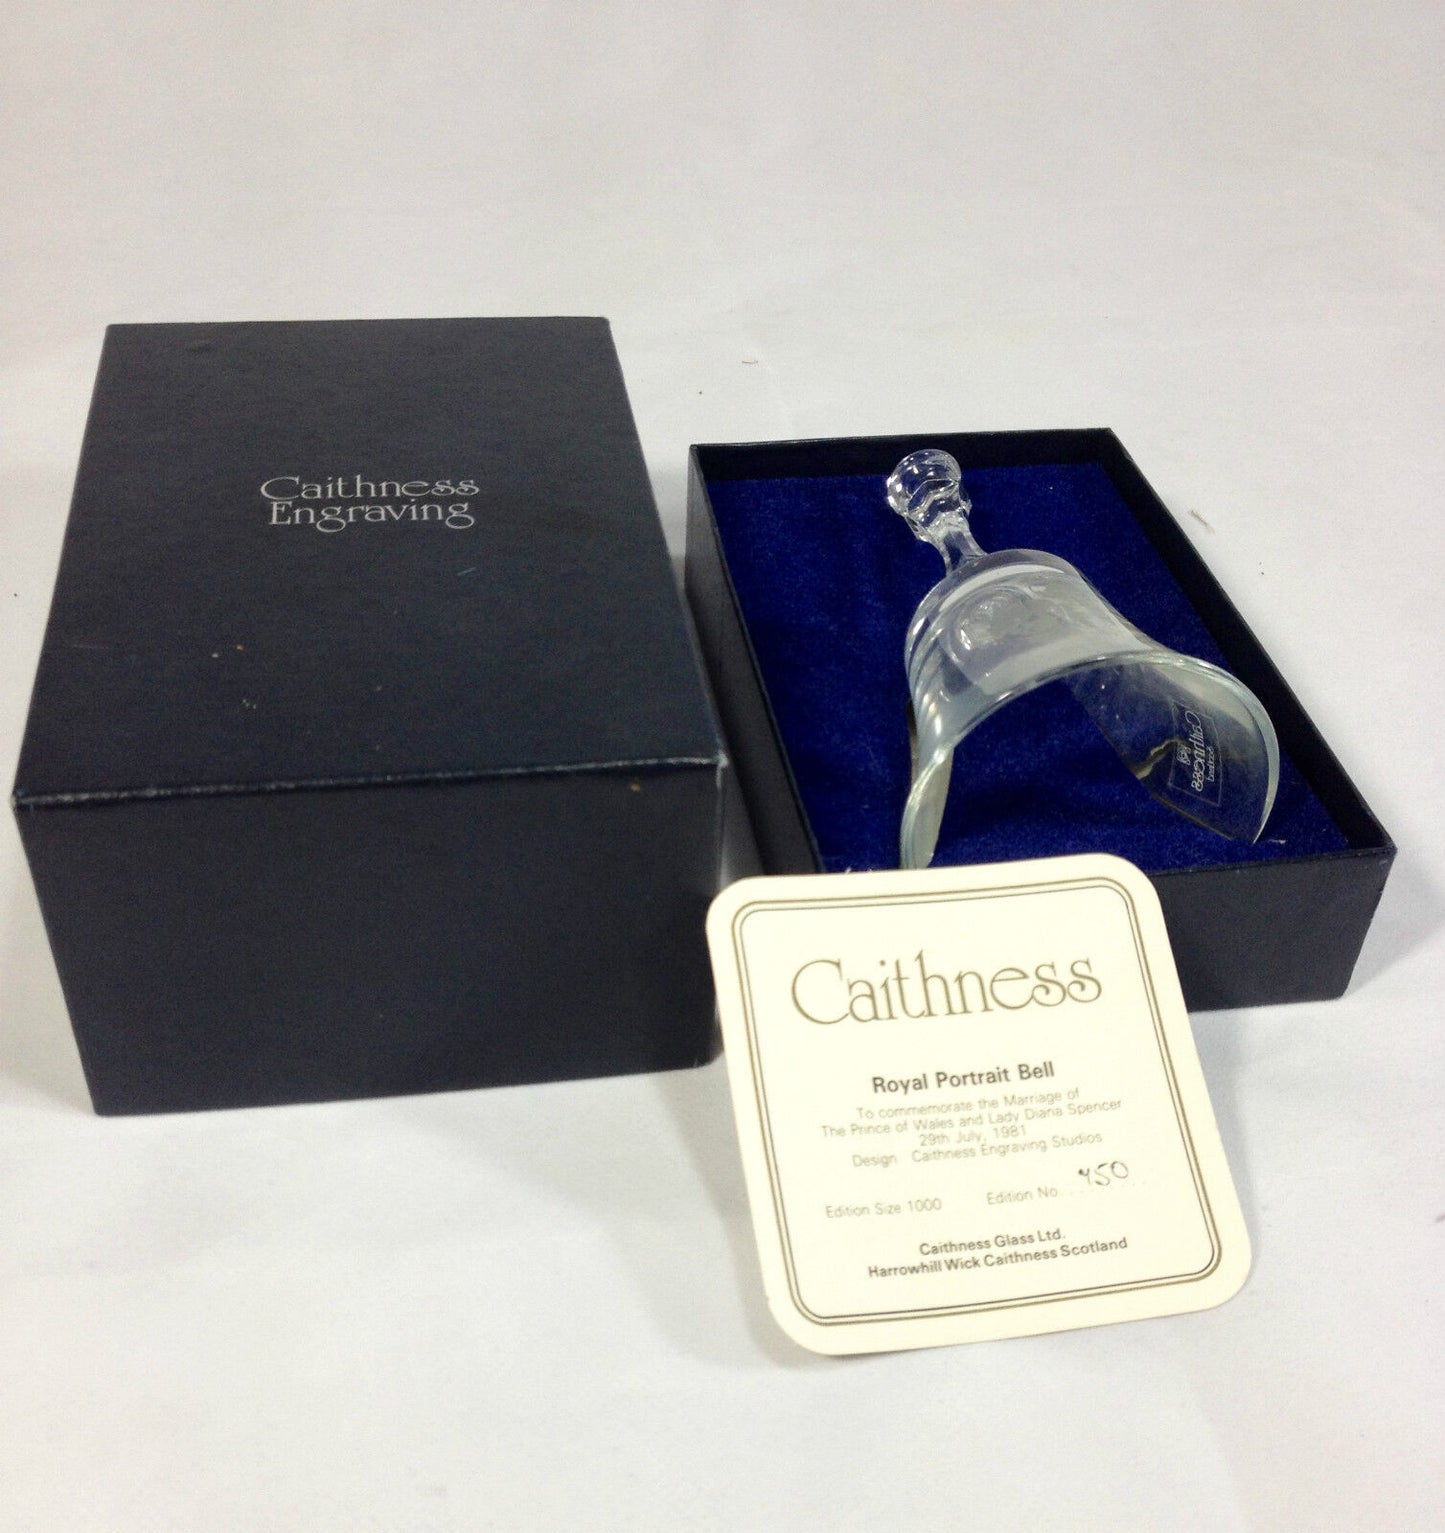 Caithness Glass Commemorative Princess Diana Marriage Bell Limited Edition Boxed